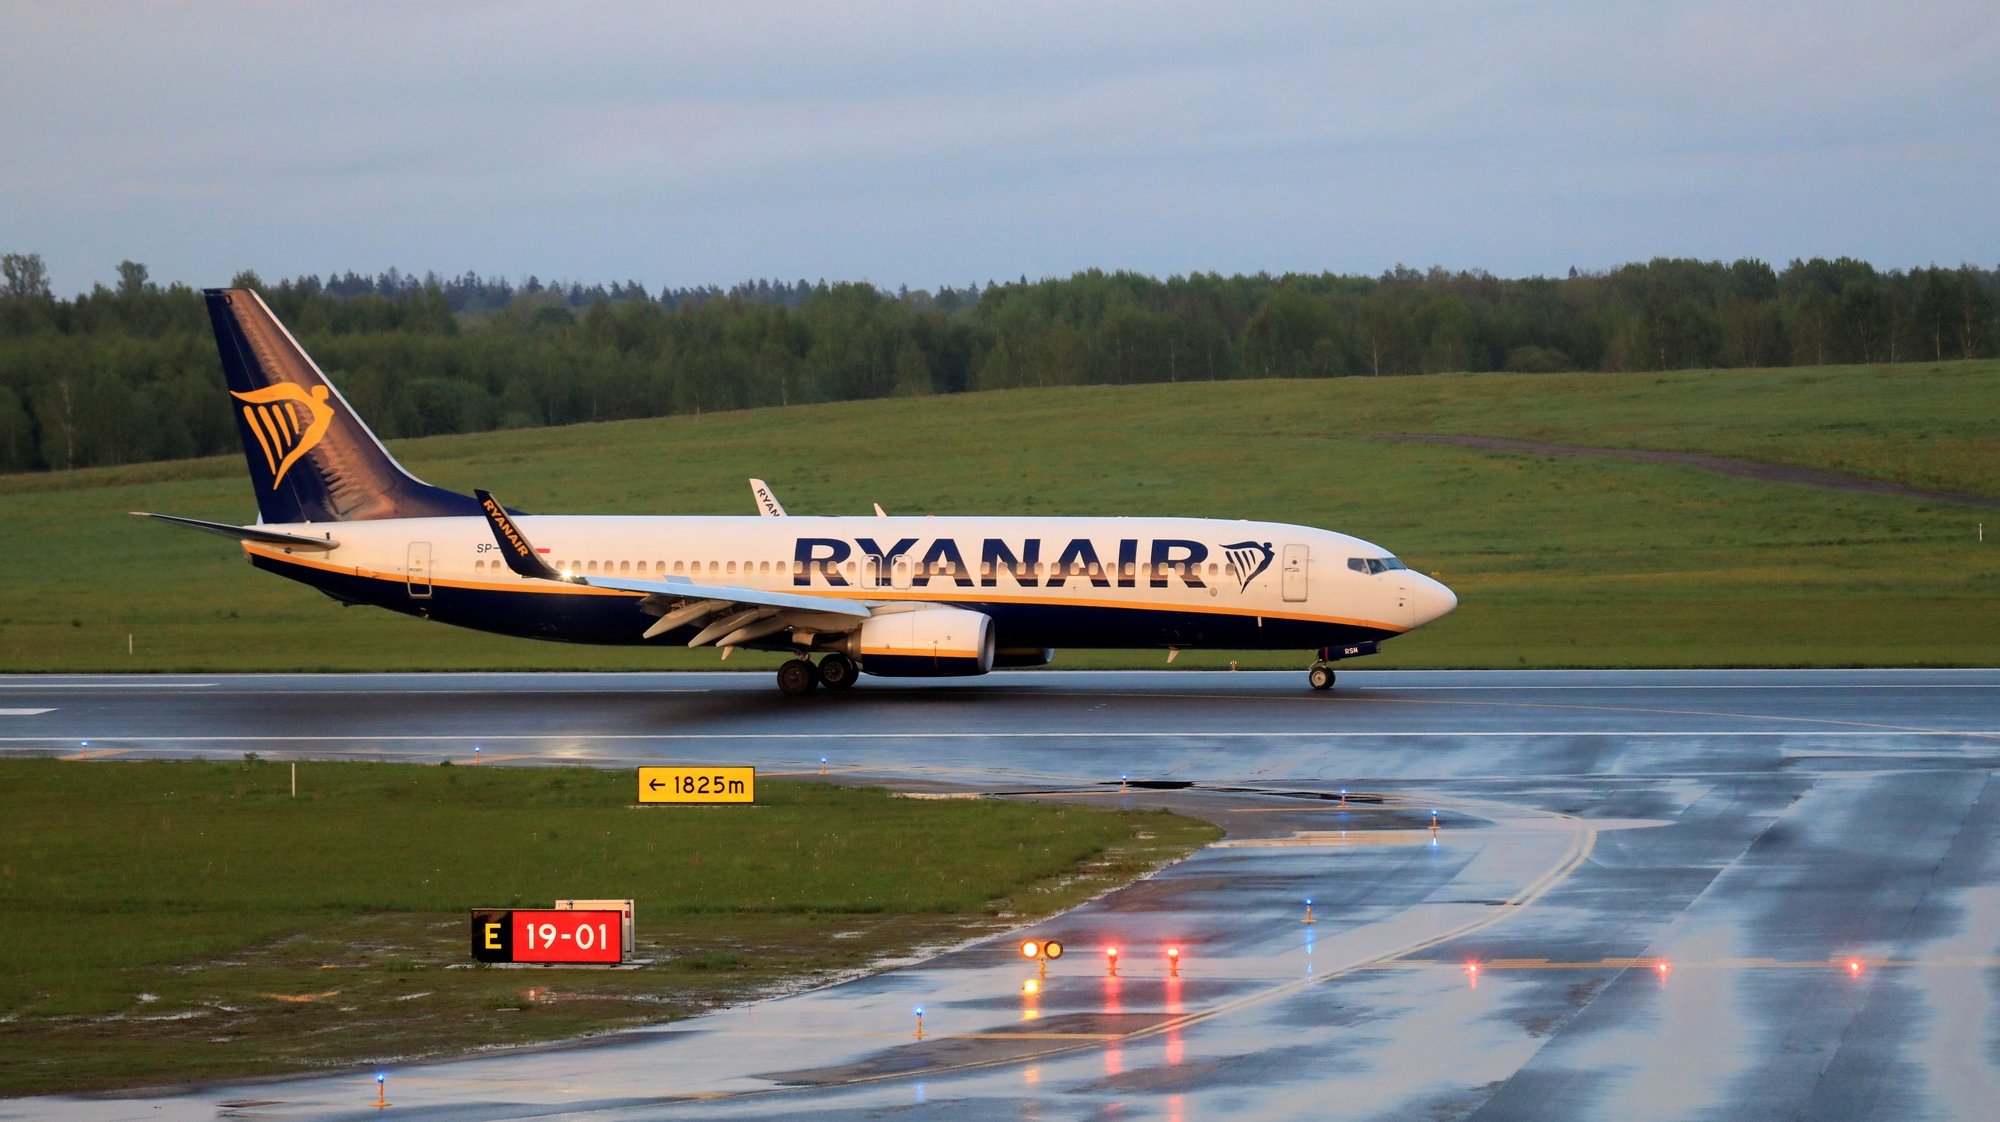 epa09224274 A Ryanair Boeing 737-800 lands in the Vilnius International Airport, in Vilnius, Lithuania, 23 May 2021. As Ryanair spokeswoman said, &#039;the aircraft carrying scores of passengers from Athens to Vilnius was diverted to the Belarusian capital under the escort of a Mig-29 fighter jet after its crew was notified by authorities in Minsk of a &#039;potential security threat on board&#039;. A Ryanair flight from Athens, Greece to Vilnius, Lithuania, with Belarus&#039; opposition journalist Roman Protasevich onboard, has been diverted and forced to land in Minsk on 23 May 2021, after alleged bomb threat. Protasevich was detained by Belarusian Police after landing, as Belarusian Human Rights Center &#039;Viasna&#039; reports and Lithuanian President Gitanas Nauseda demanded immediate release of Protasevich.  EPA/STRINGER